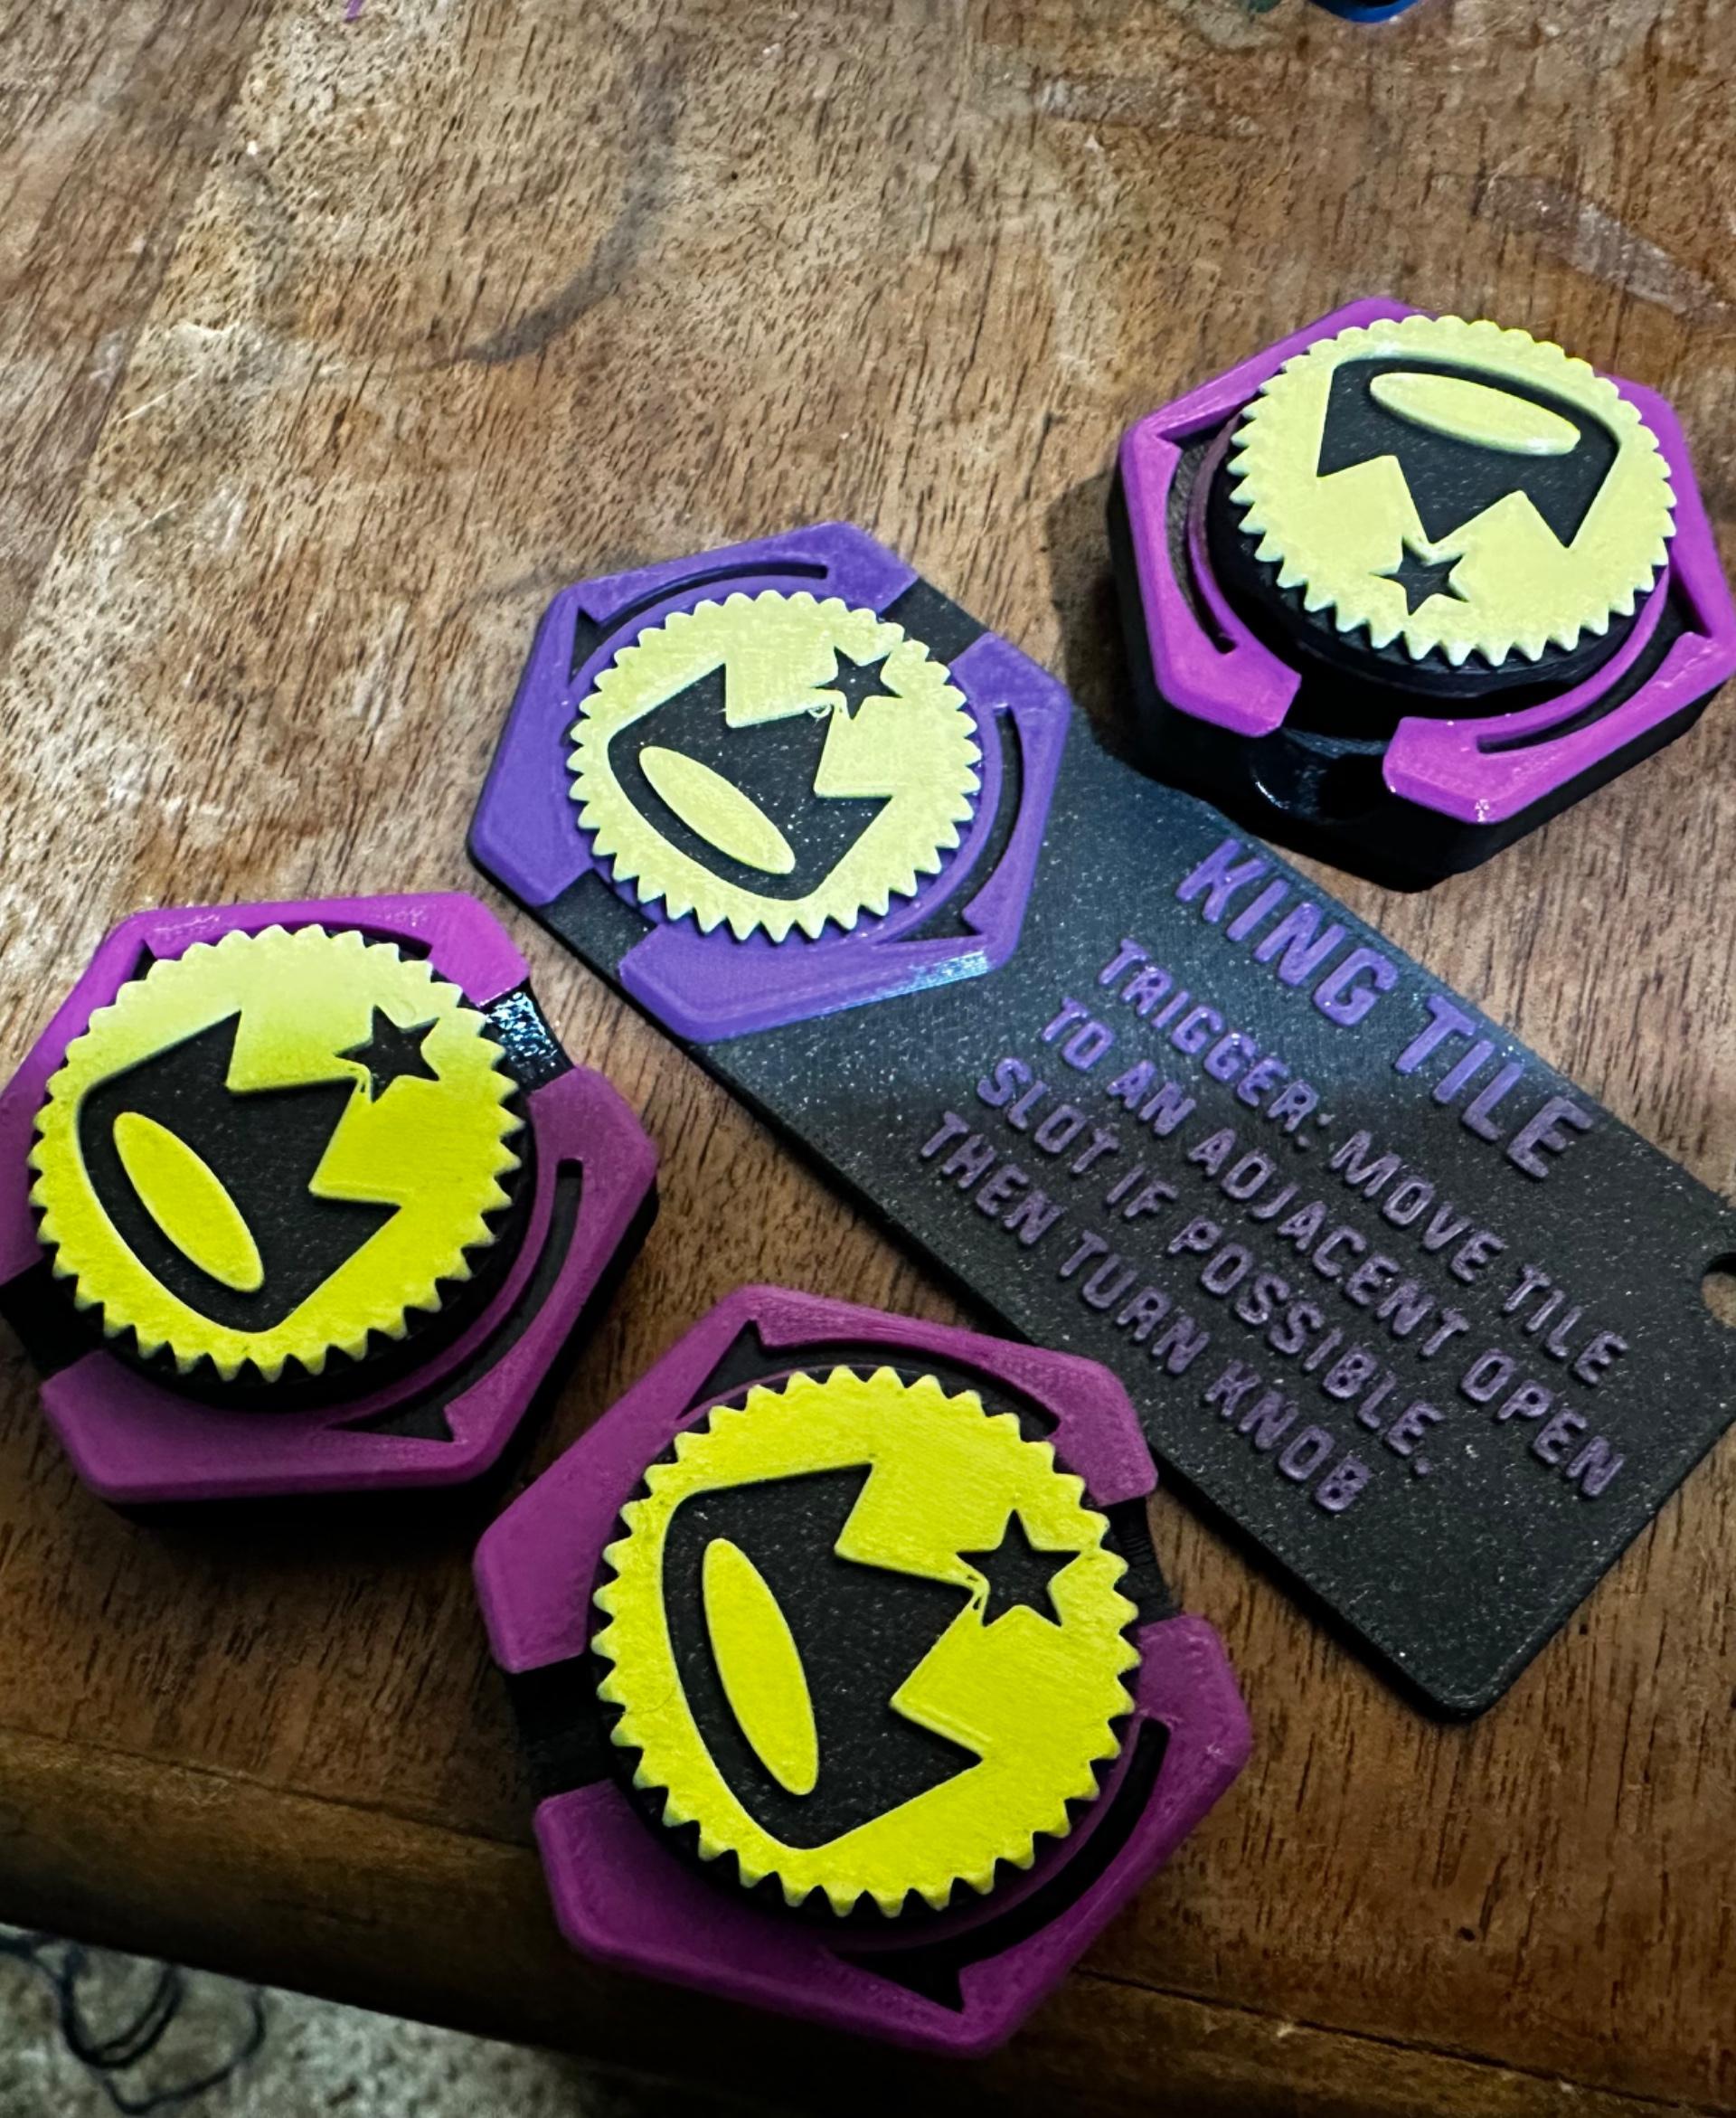 Hextraction King Tile - Liked the Purple/Black/Yellow scheme that someone else had shared and decided to do the same.  Printed in Hatchbox Black and Purple PETG, Flashforge Matte Galaxy Black PLA and Creality Yellow PLA. - 3d model